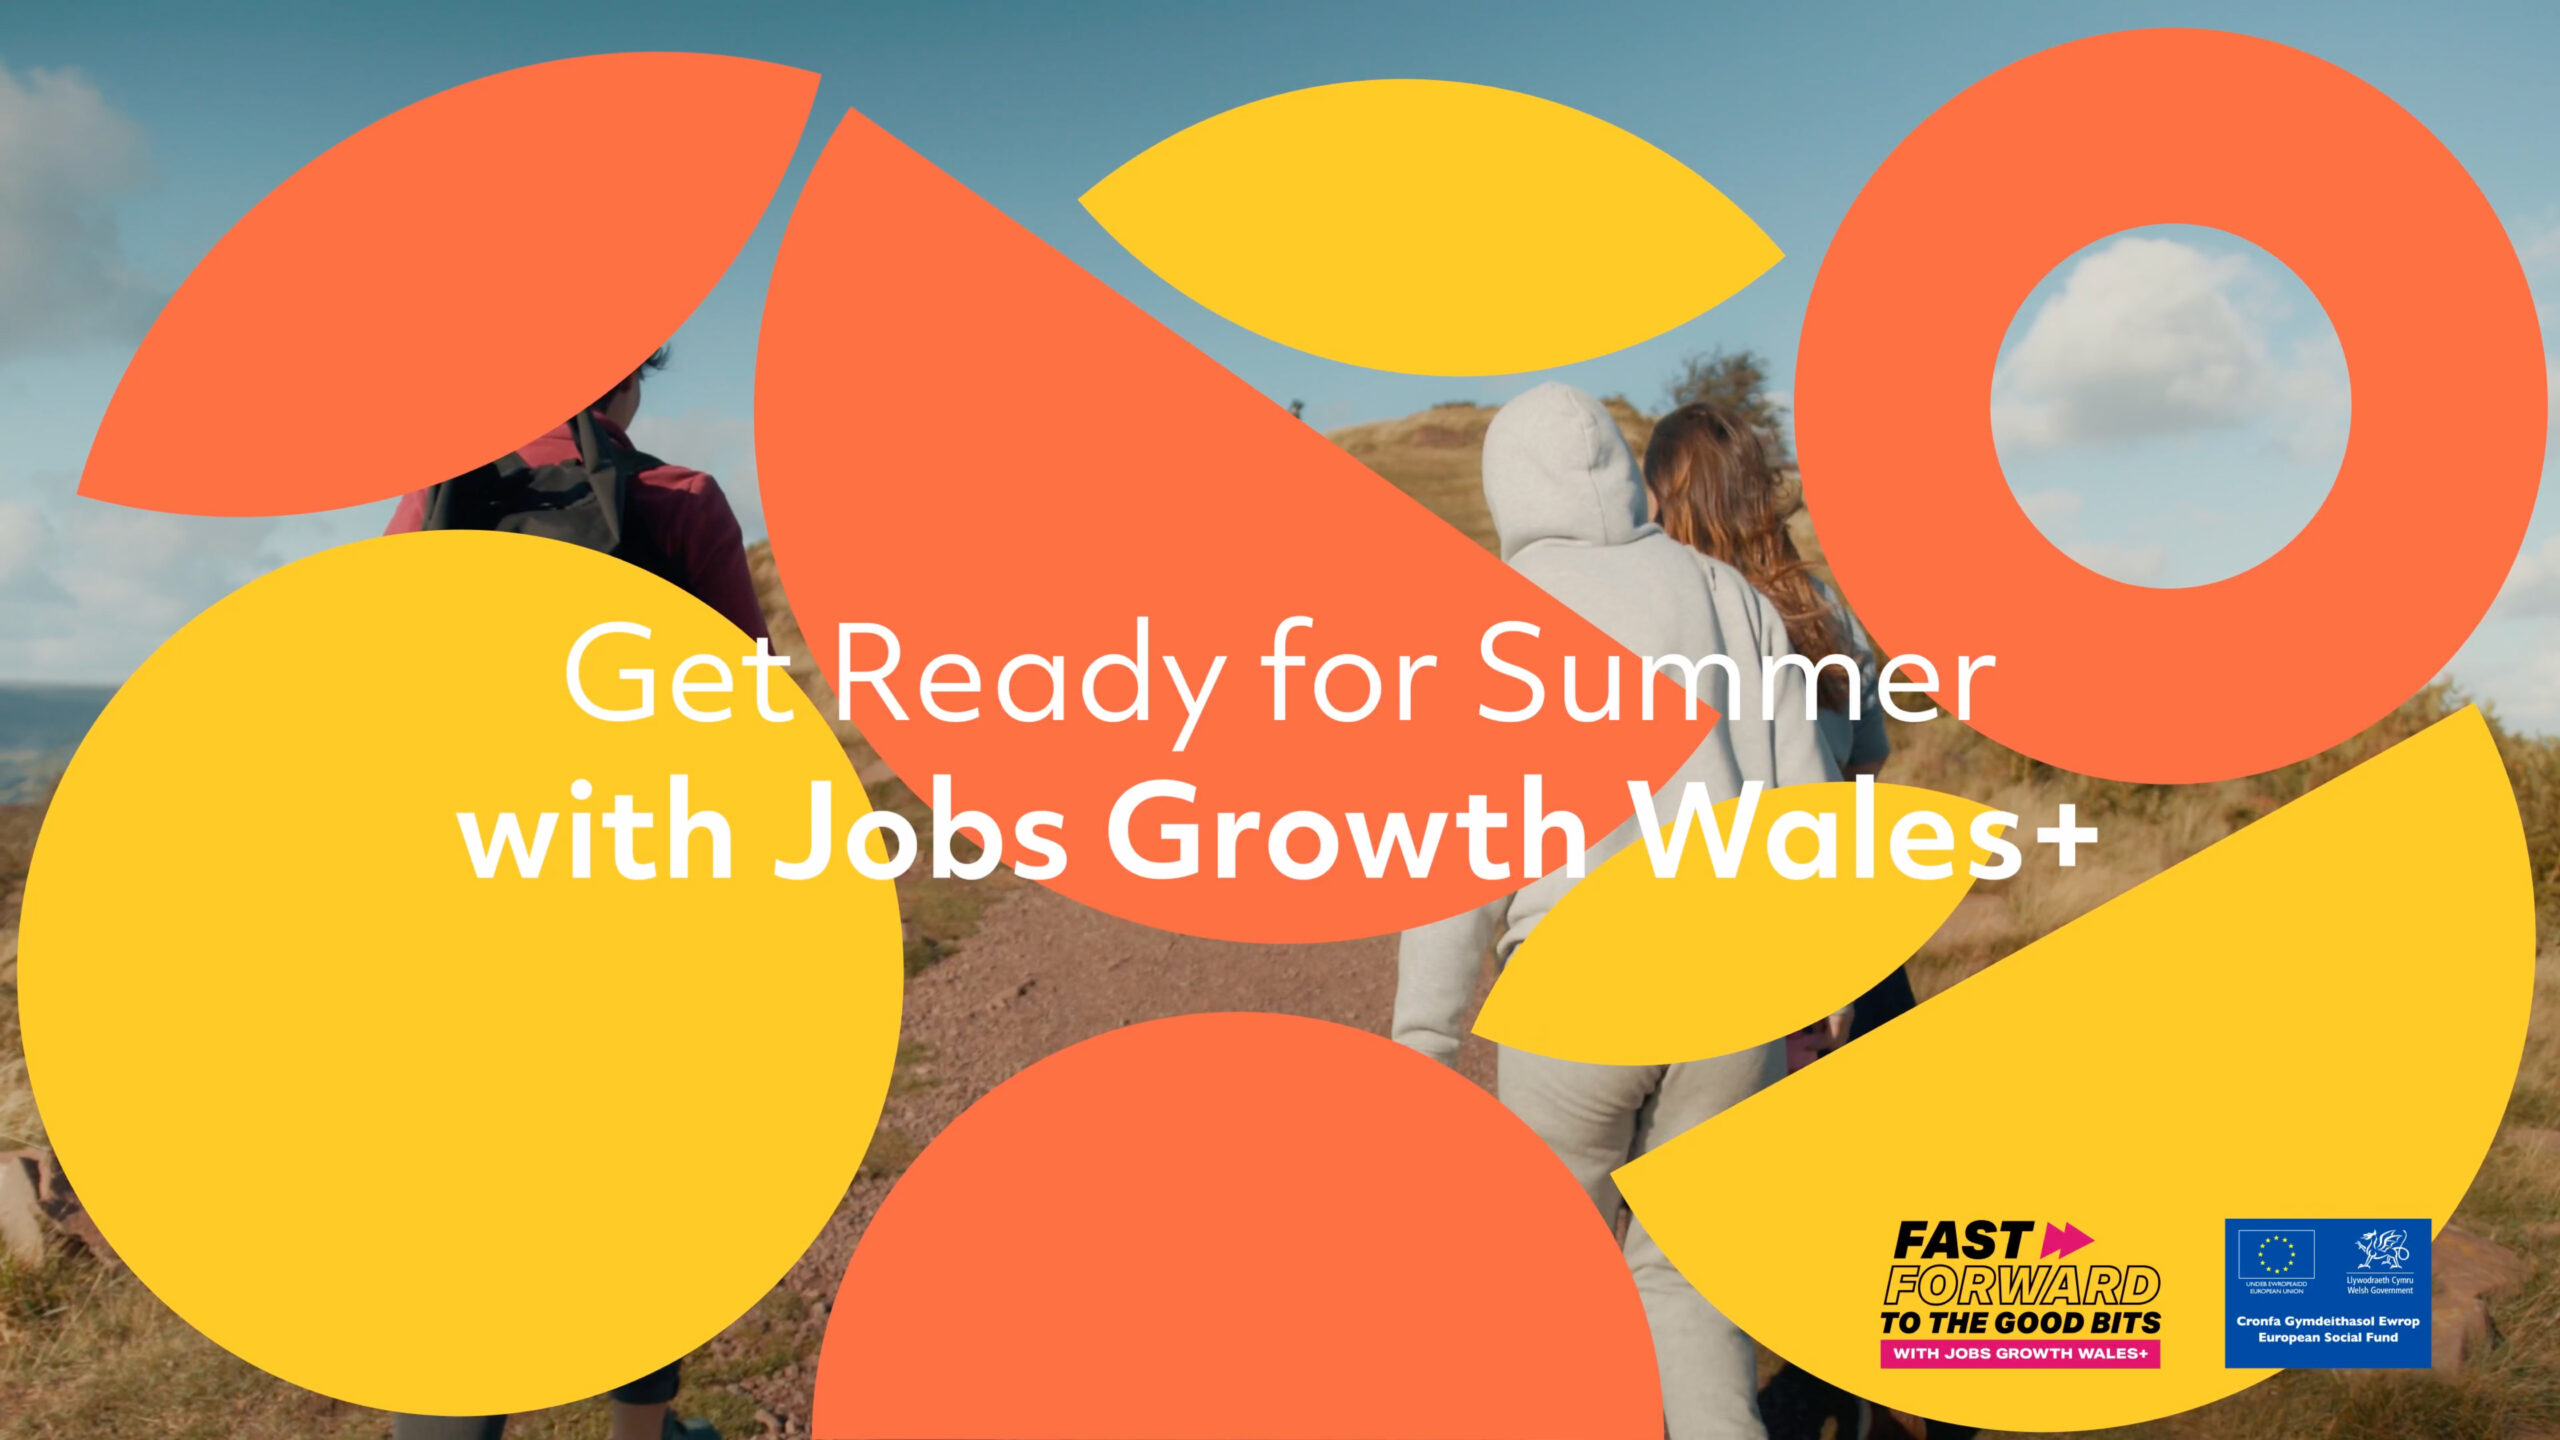 Orange and yellow graphic, with the text "Get Ready for Summer with Jobs Growth Wales Plus"